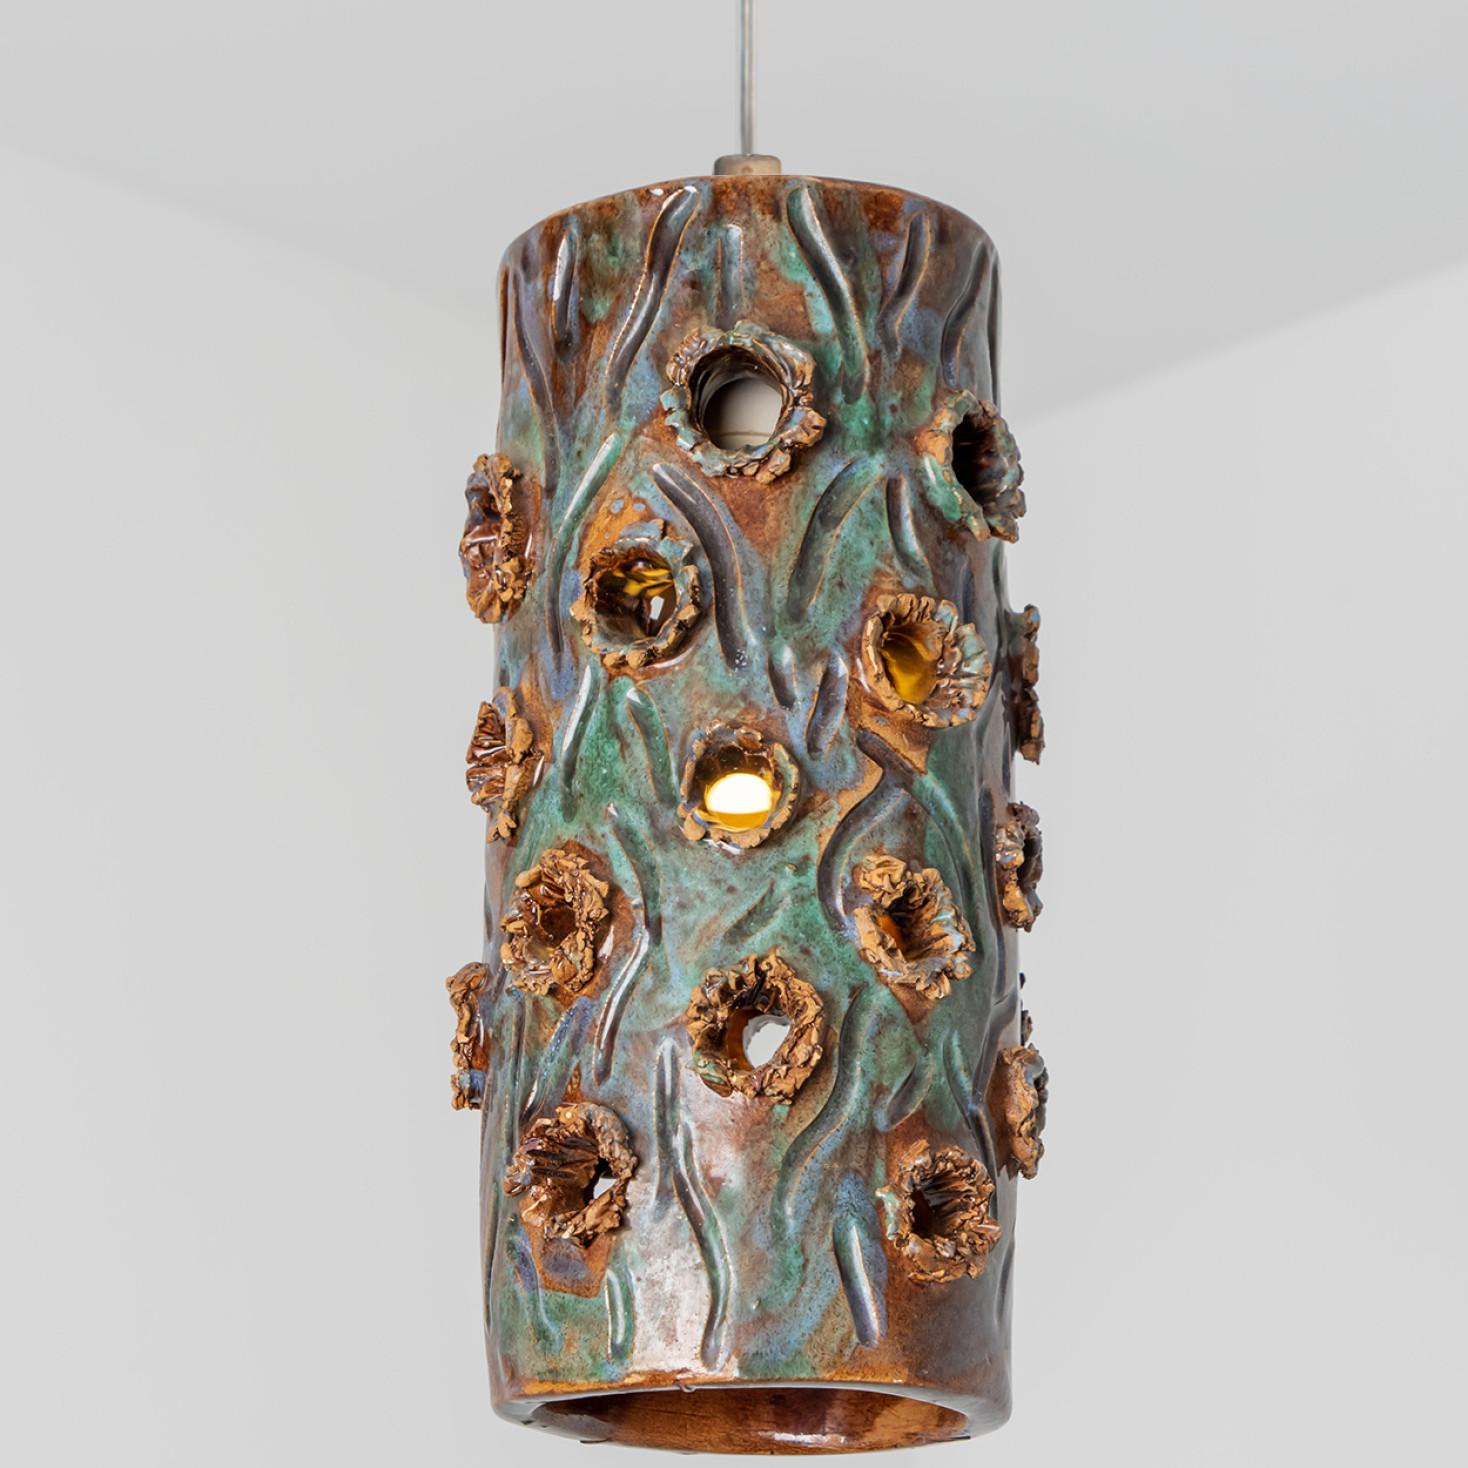 Other 1 of 3 Turquoise Blue Brown Ceramic Pendant Lights, Denmark, 1970 For Sale